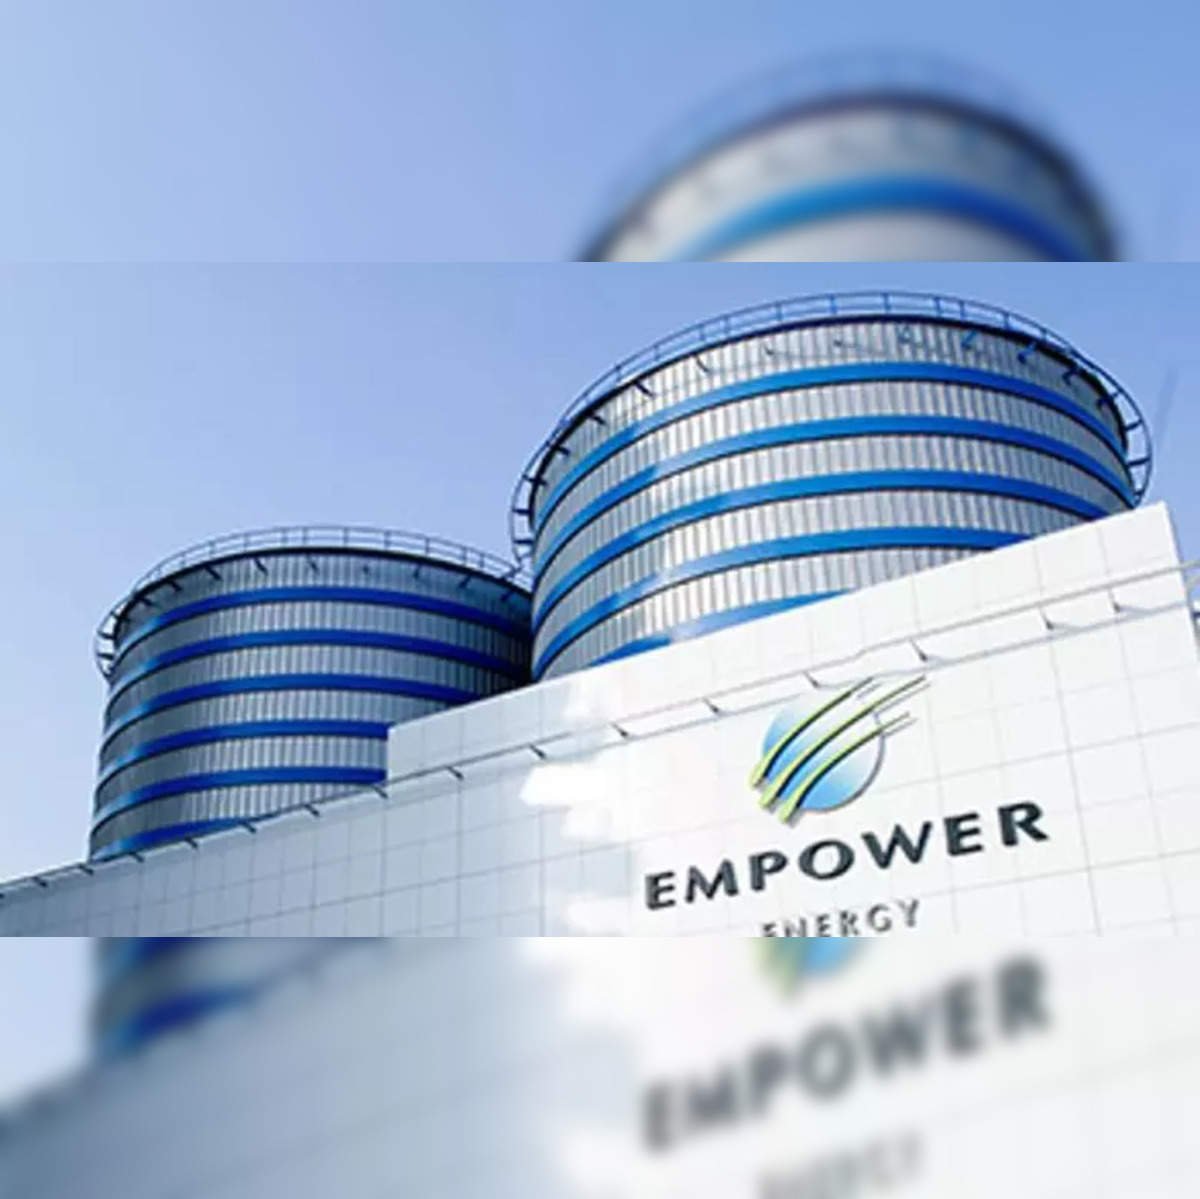 gulf news: Dubai to offer 10% of Empower in fourth state-linked IPO this  year -Gulf News - The Economic Times